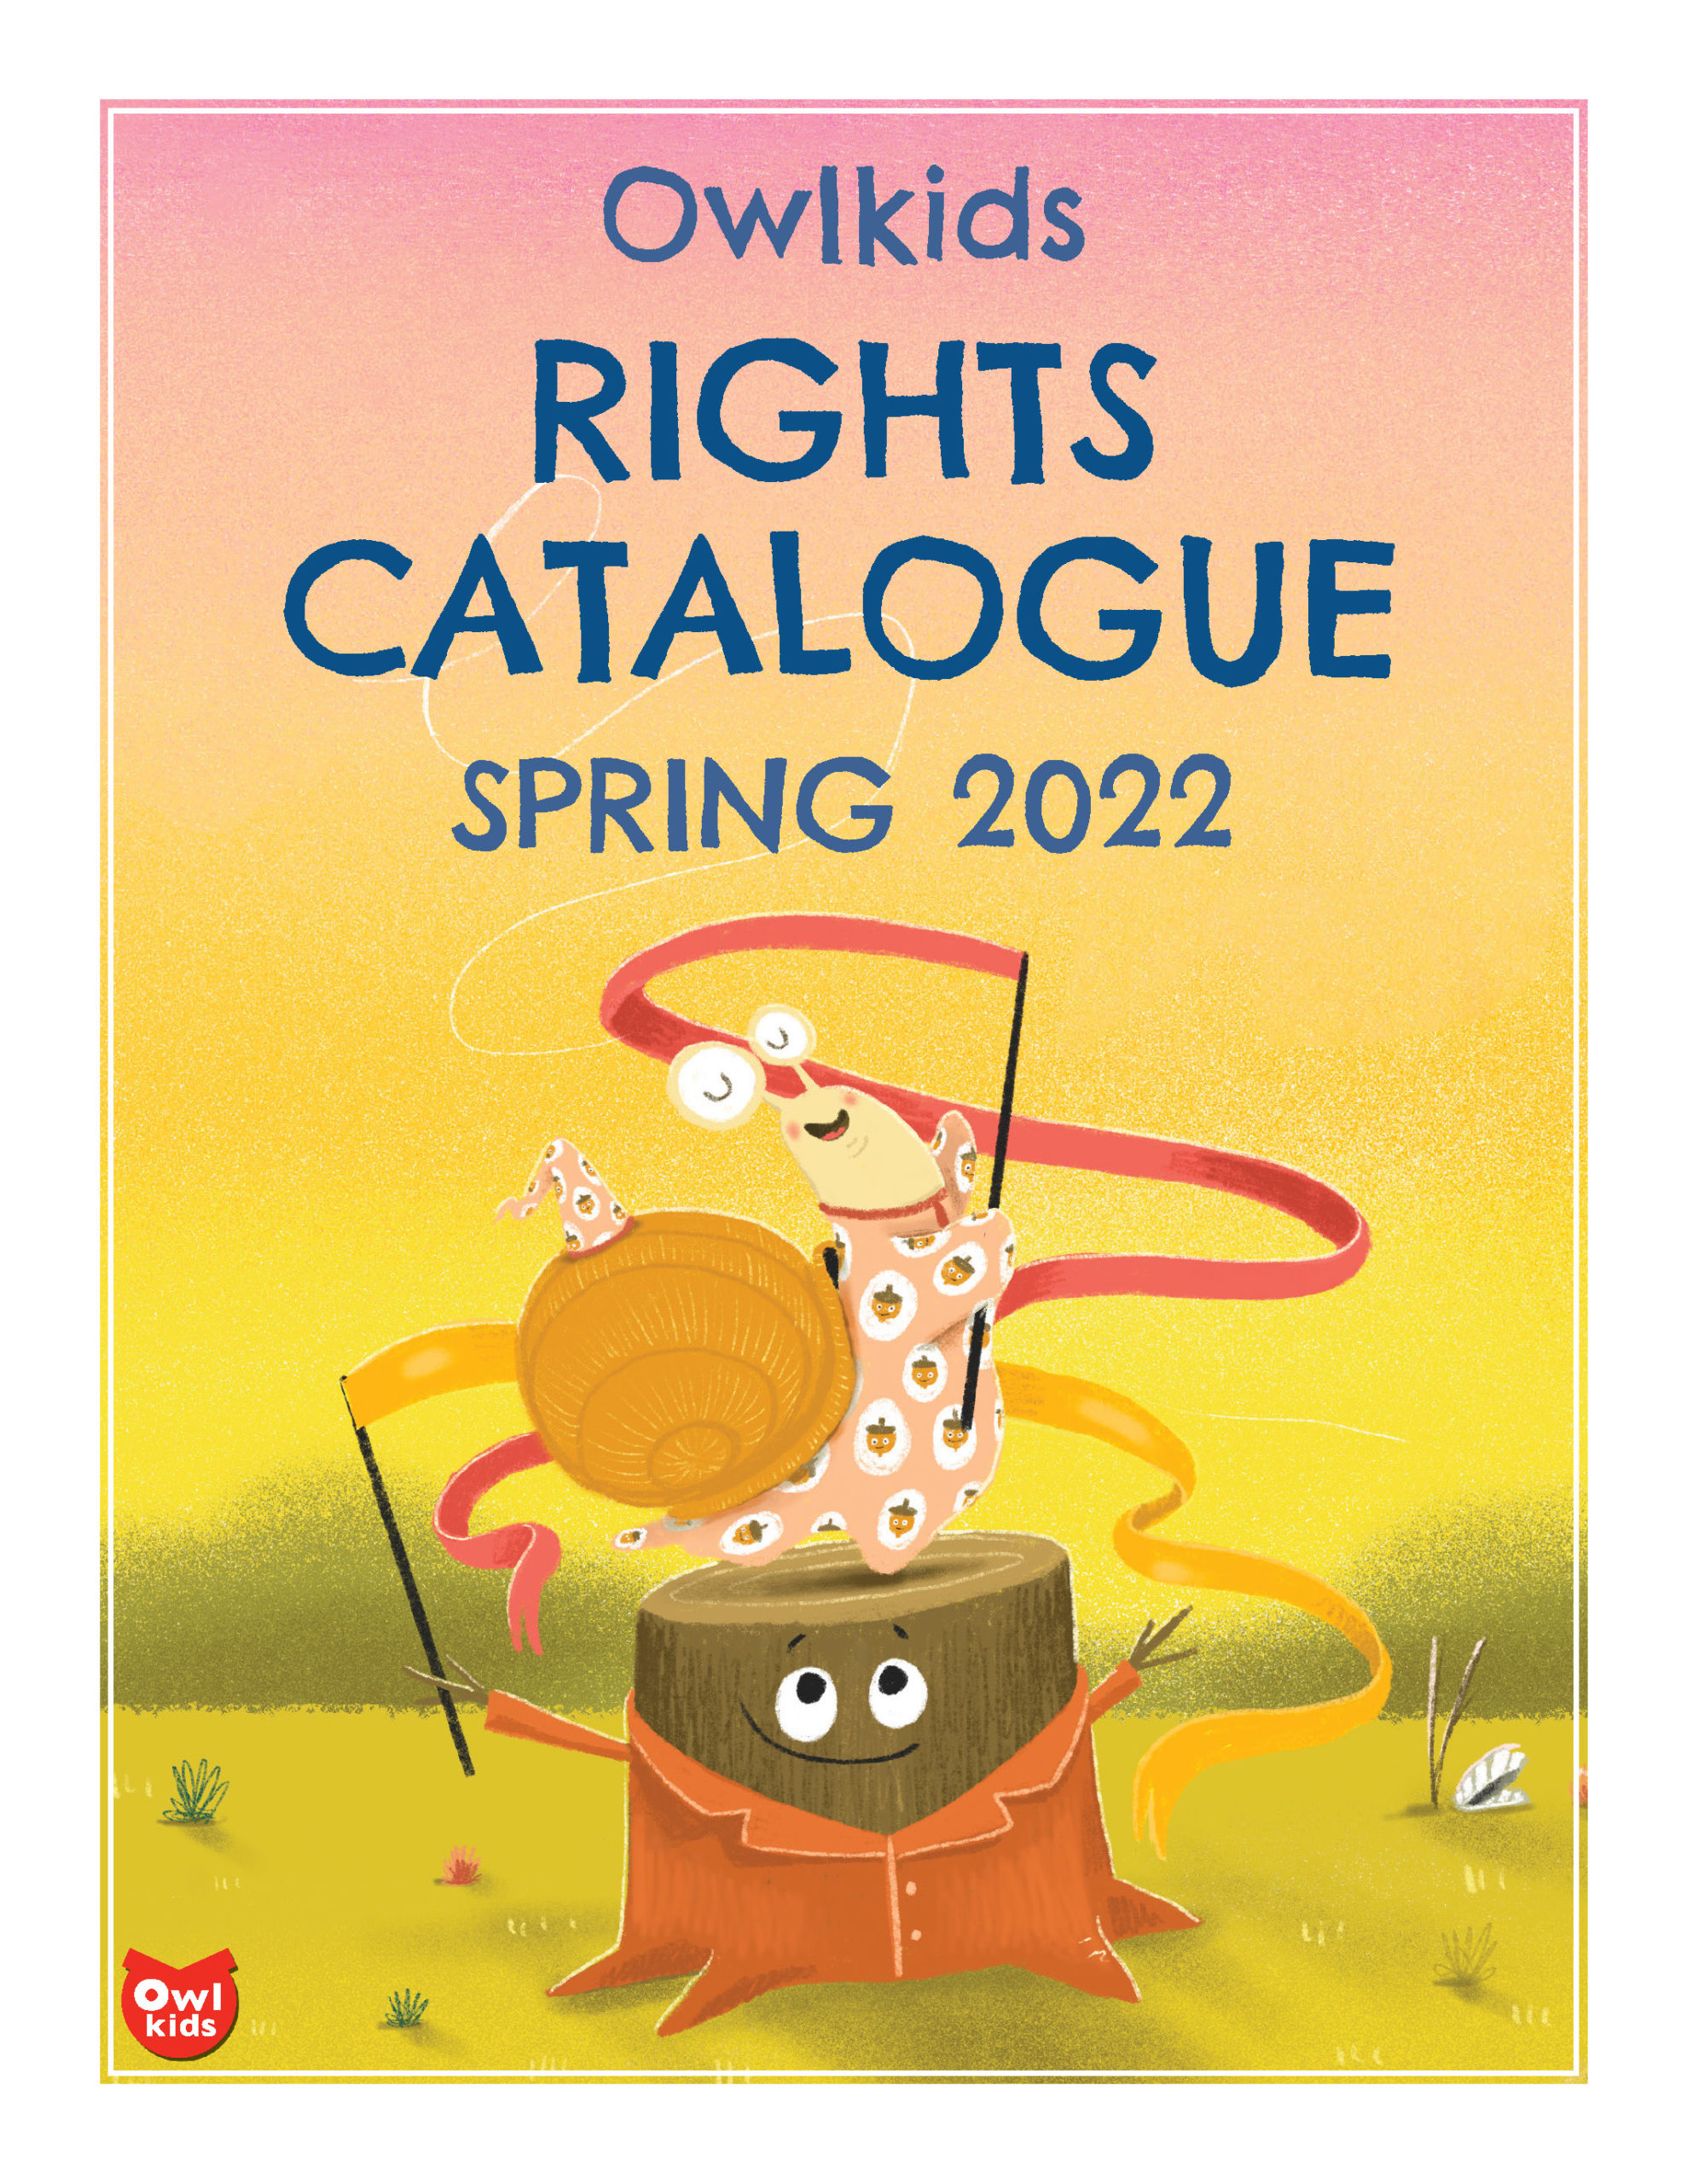 Cover for the Spring 2022 Rights catalogue.